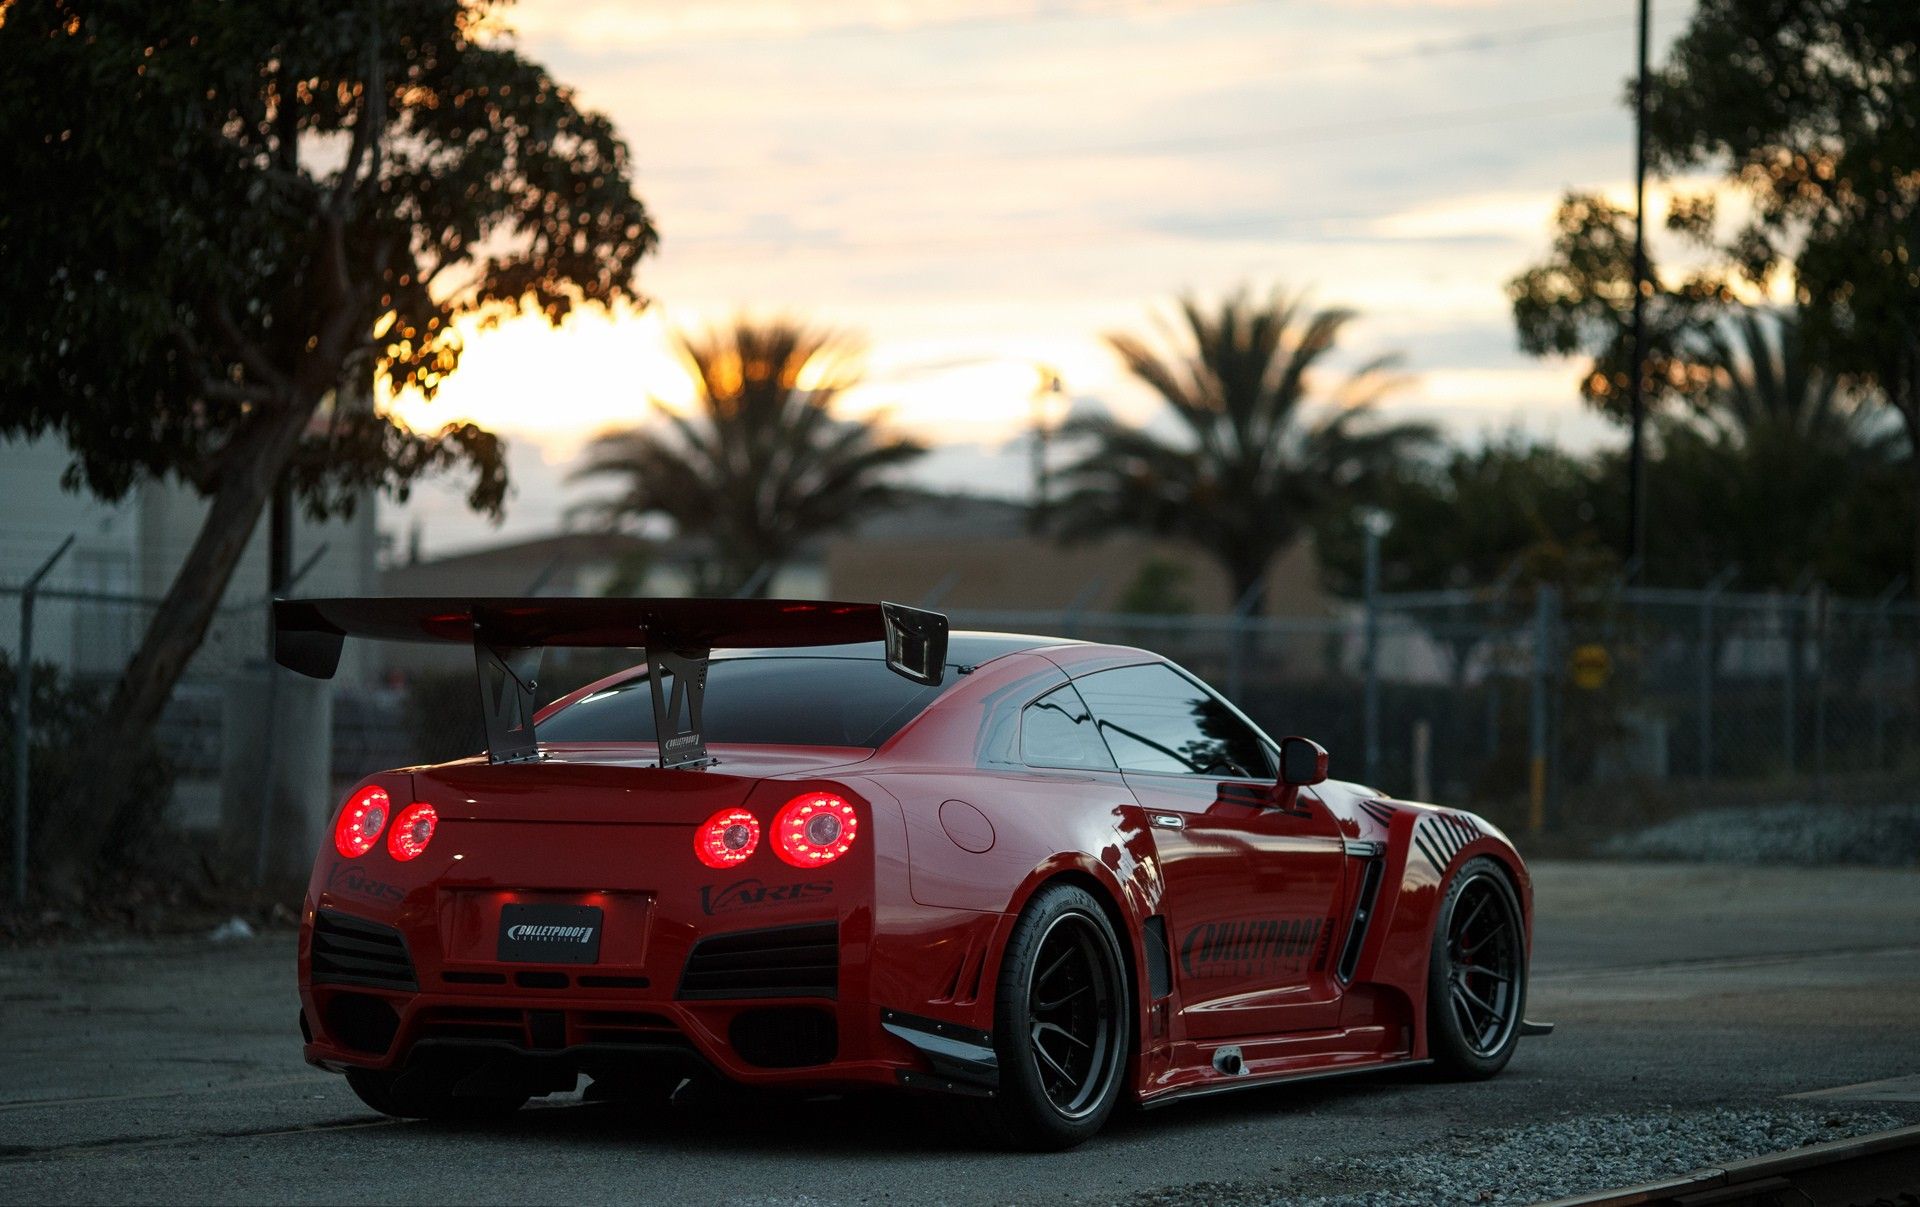 #red Cars, #Nissan GT R, #road, #car, #Nissan, #race Cars